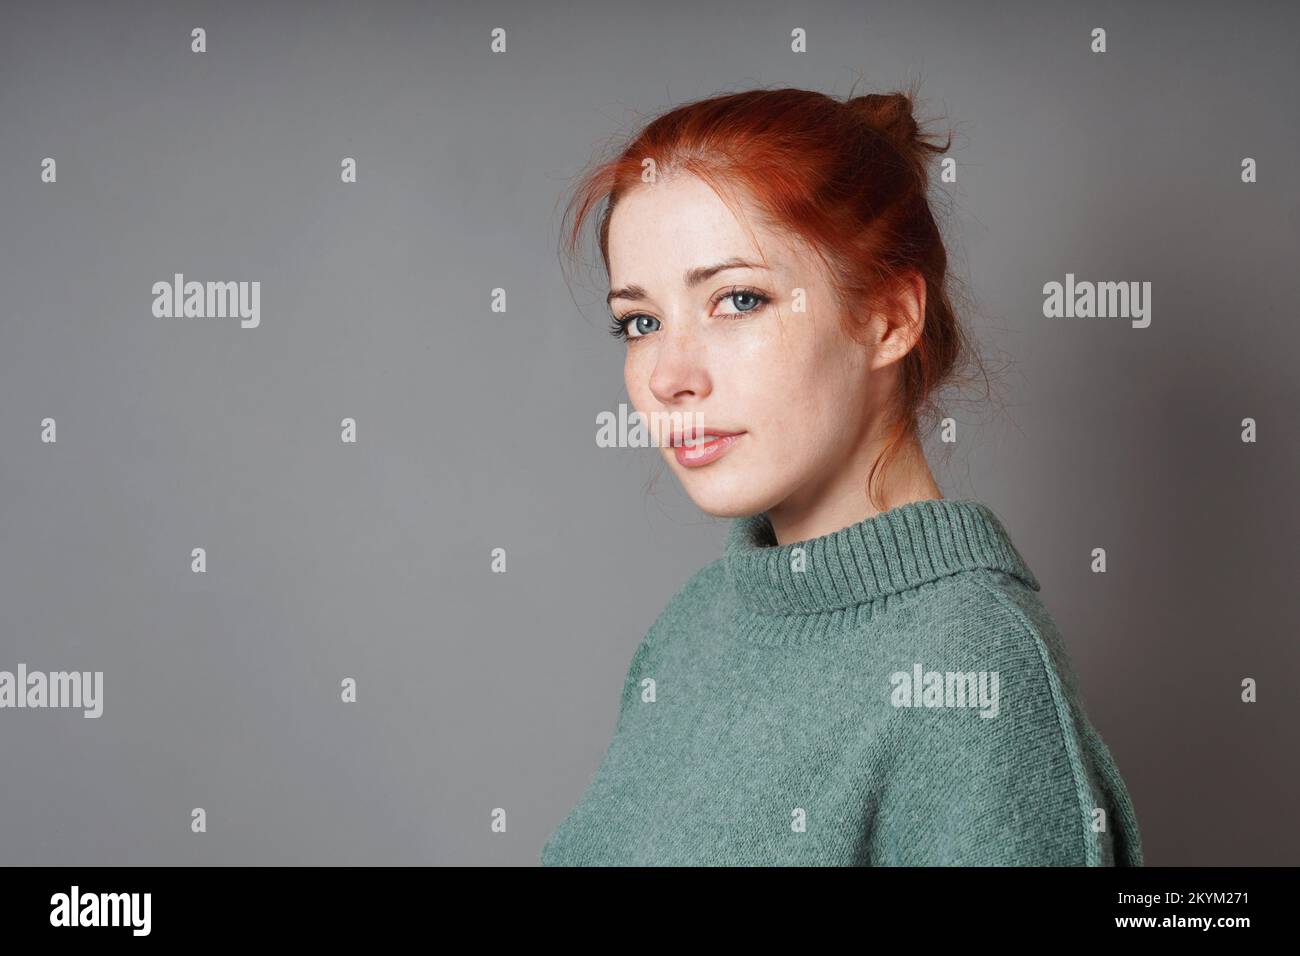 young woman with red hair bun and roll neck pullover Stock Photo